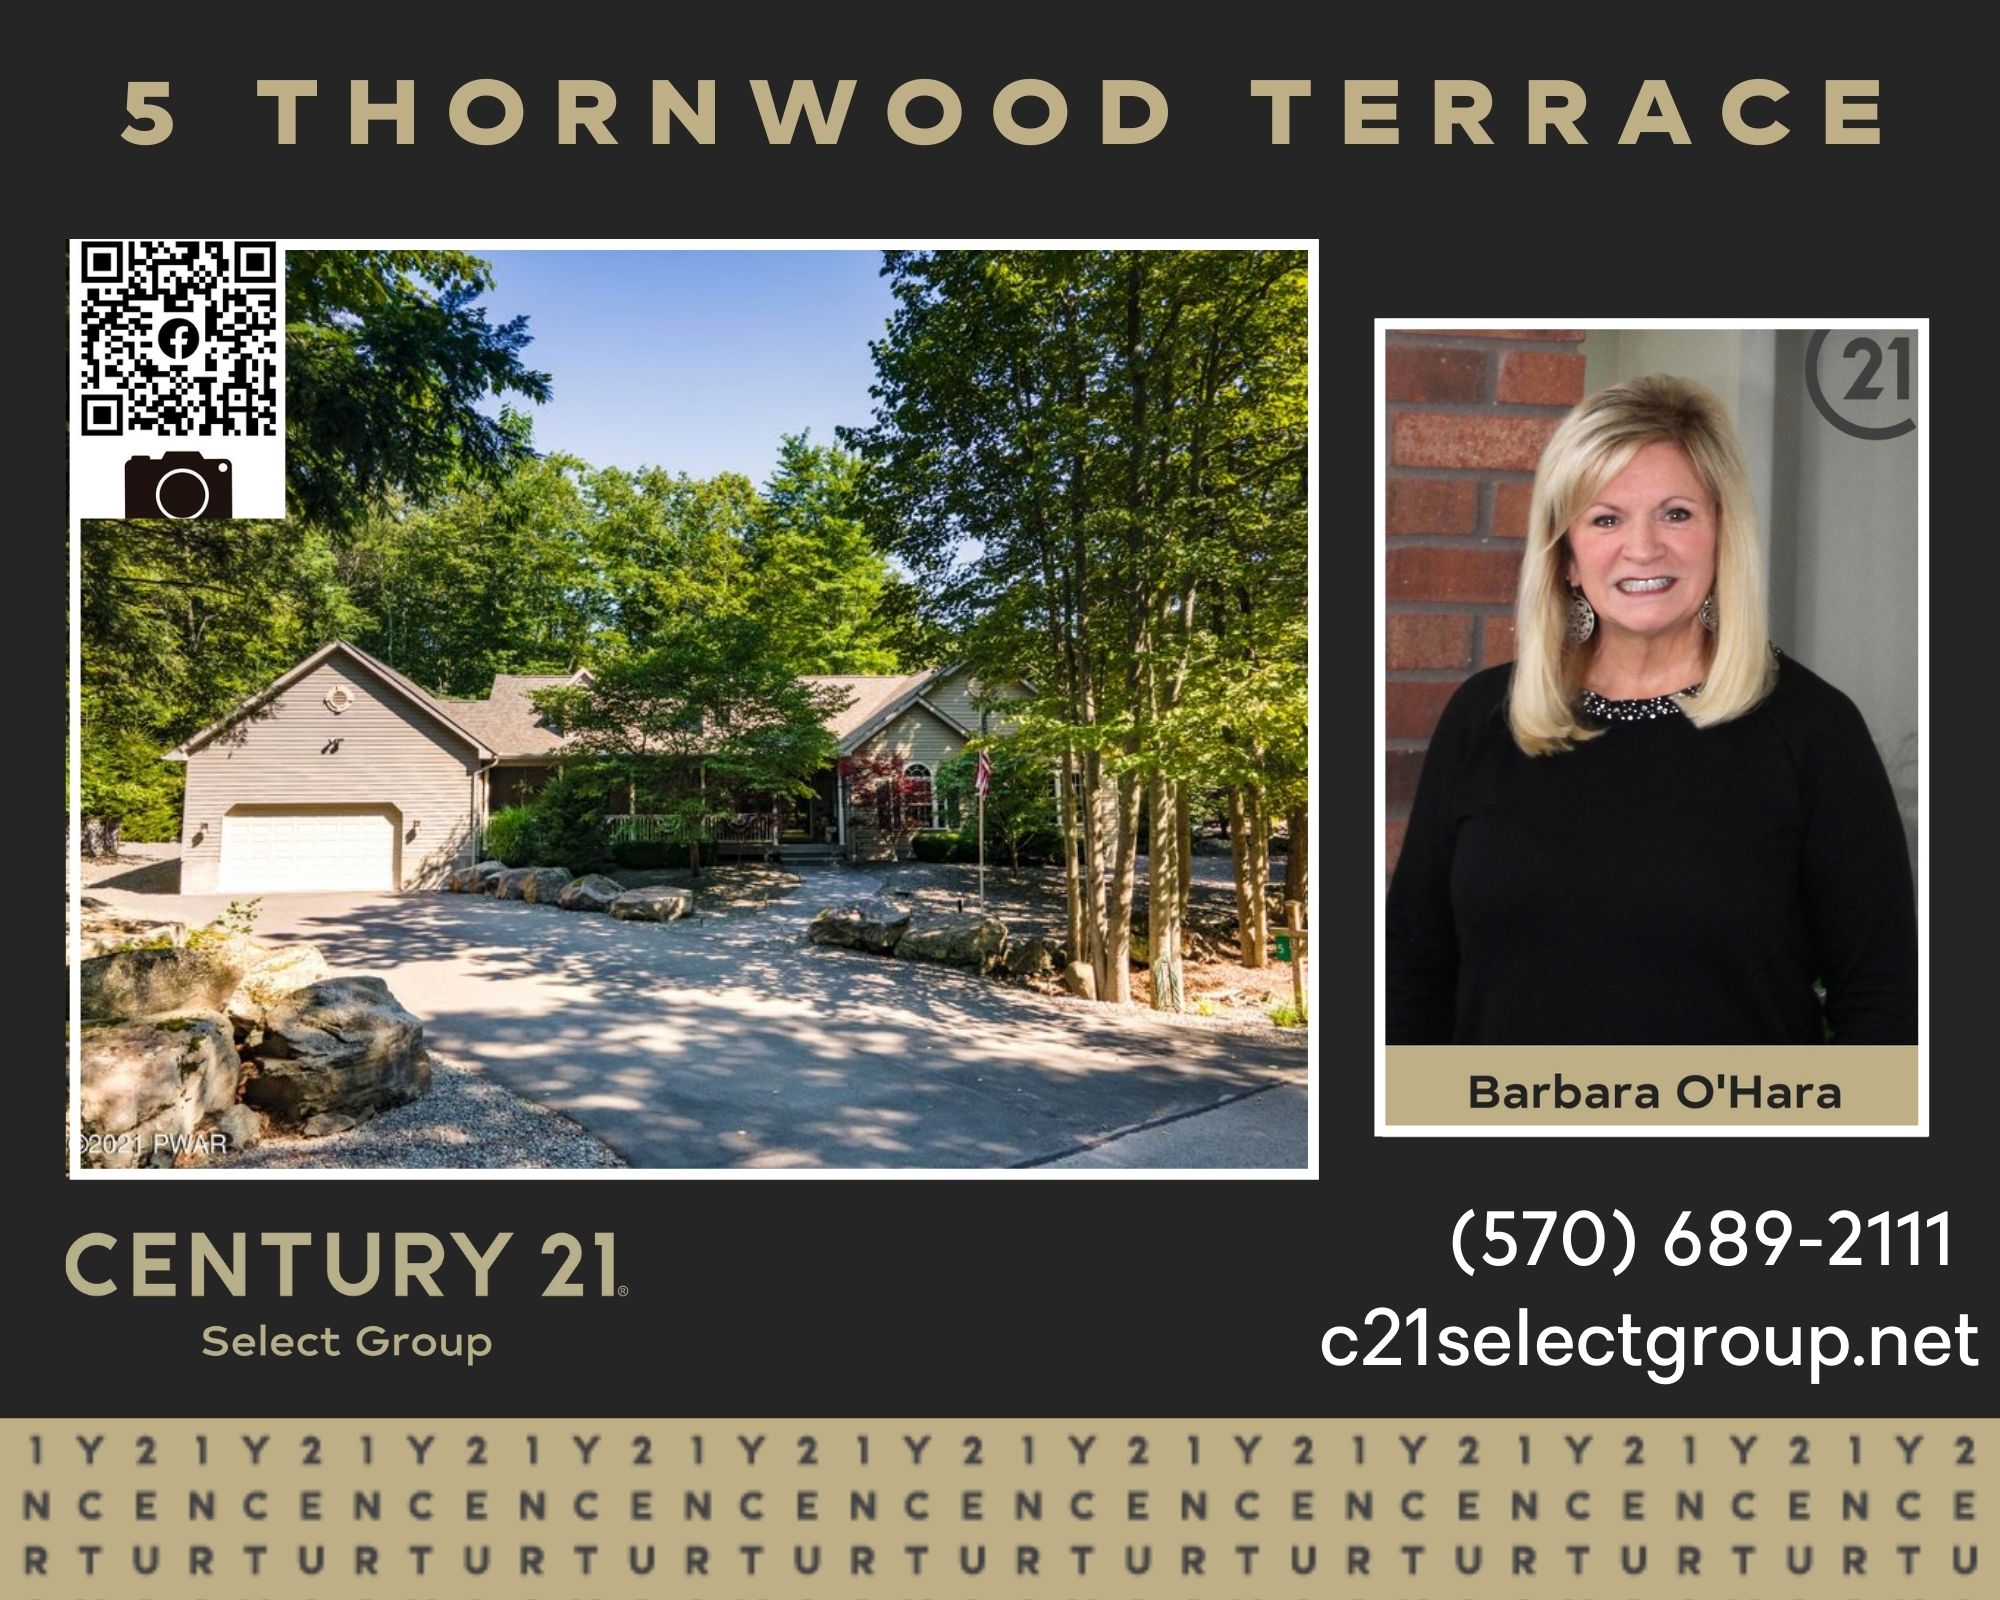 5 Thornwood Terrace: Well Maintained Hideout Ranch